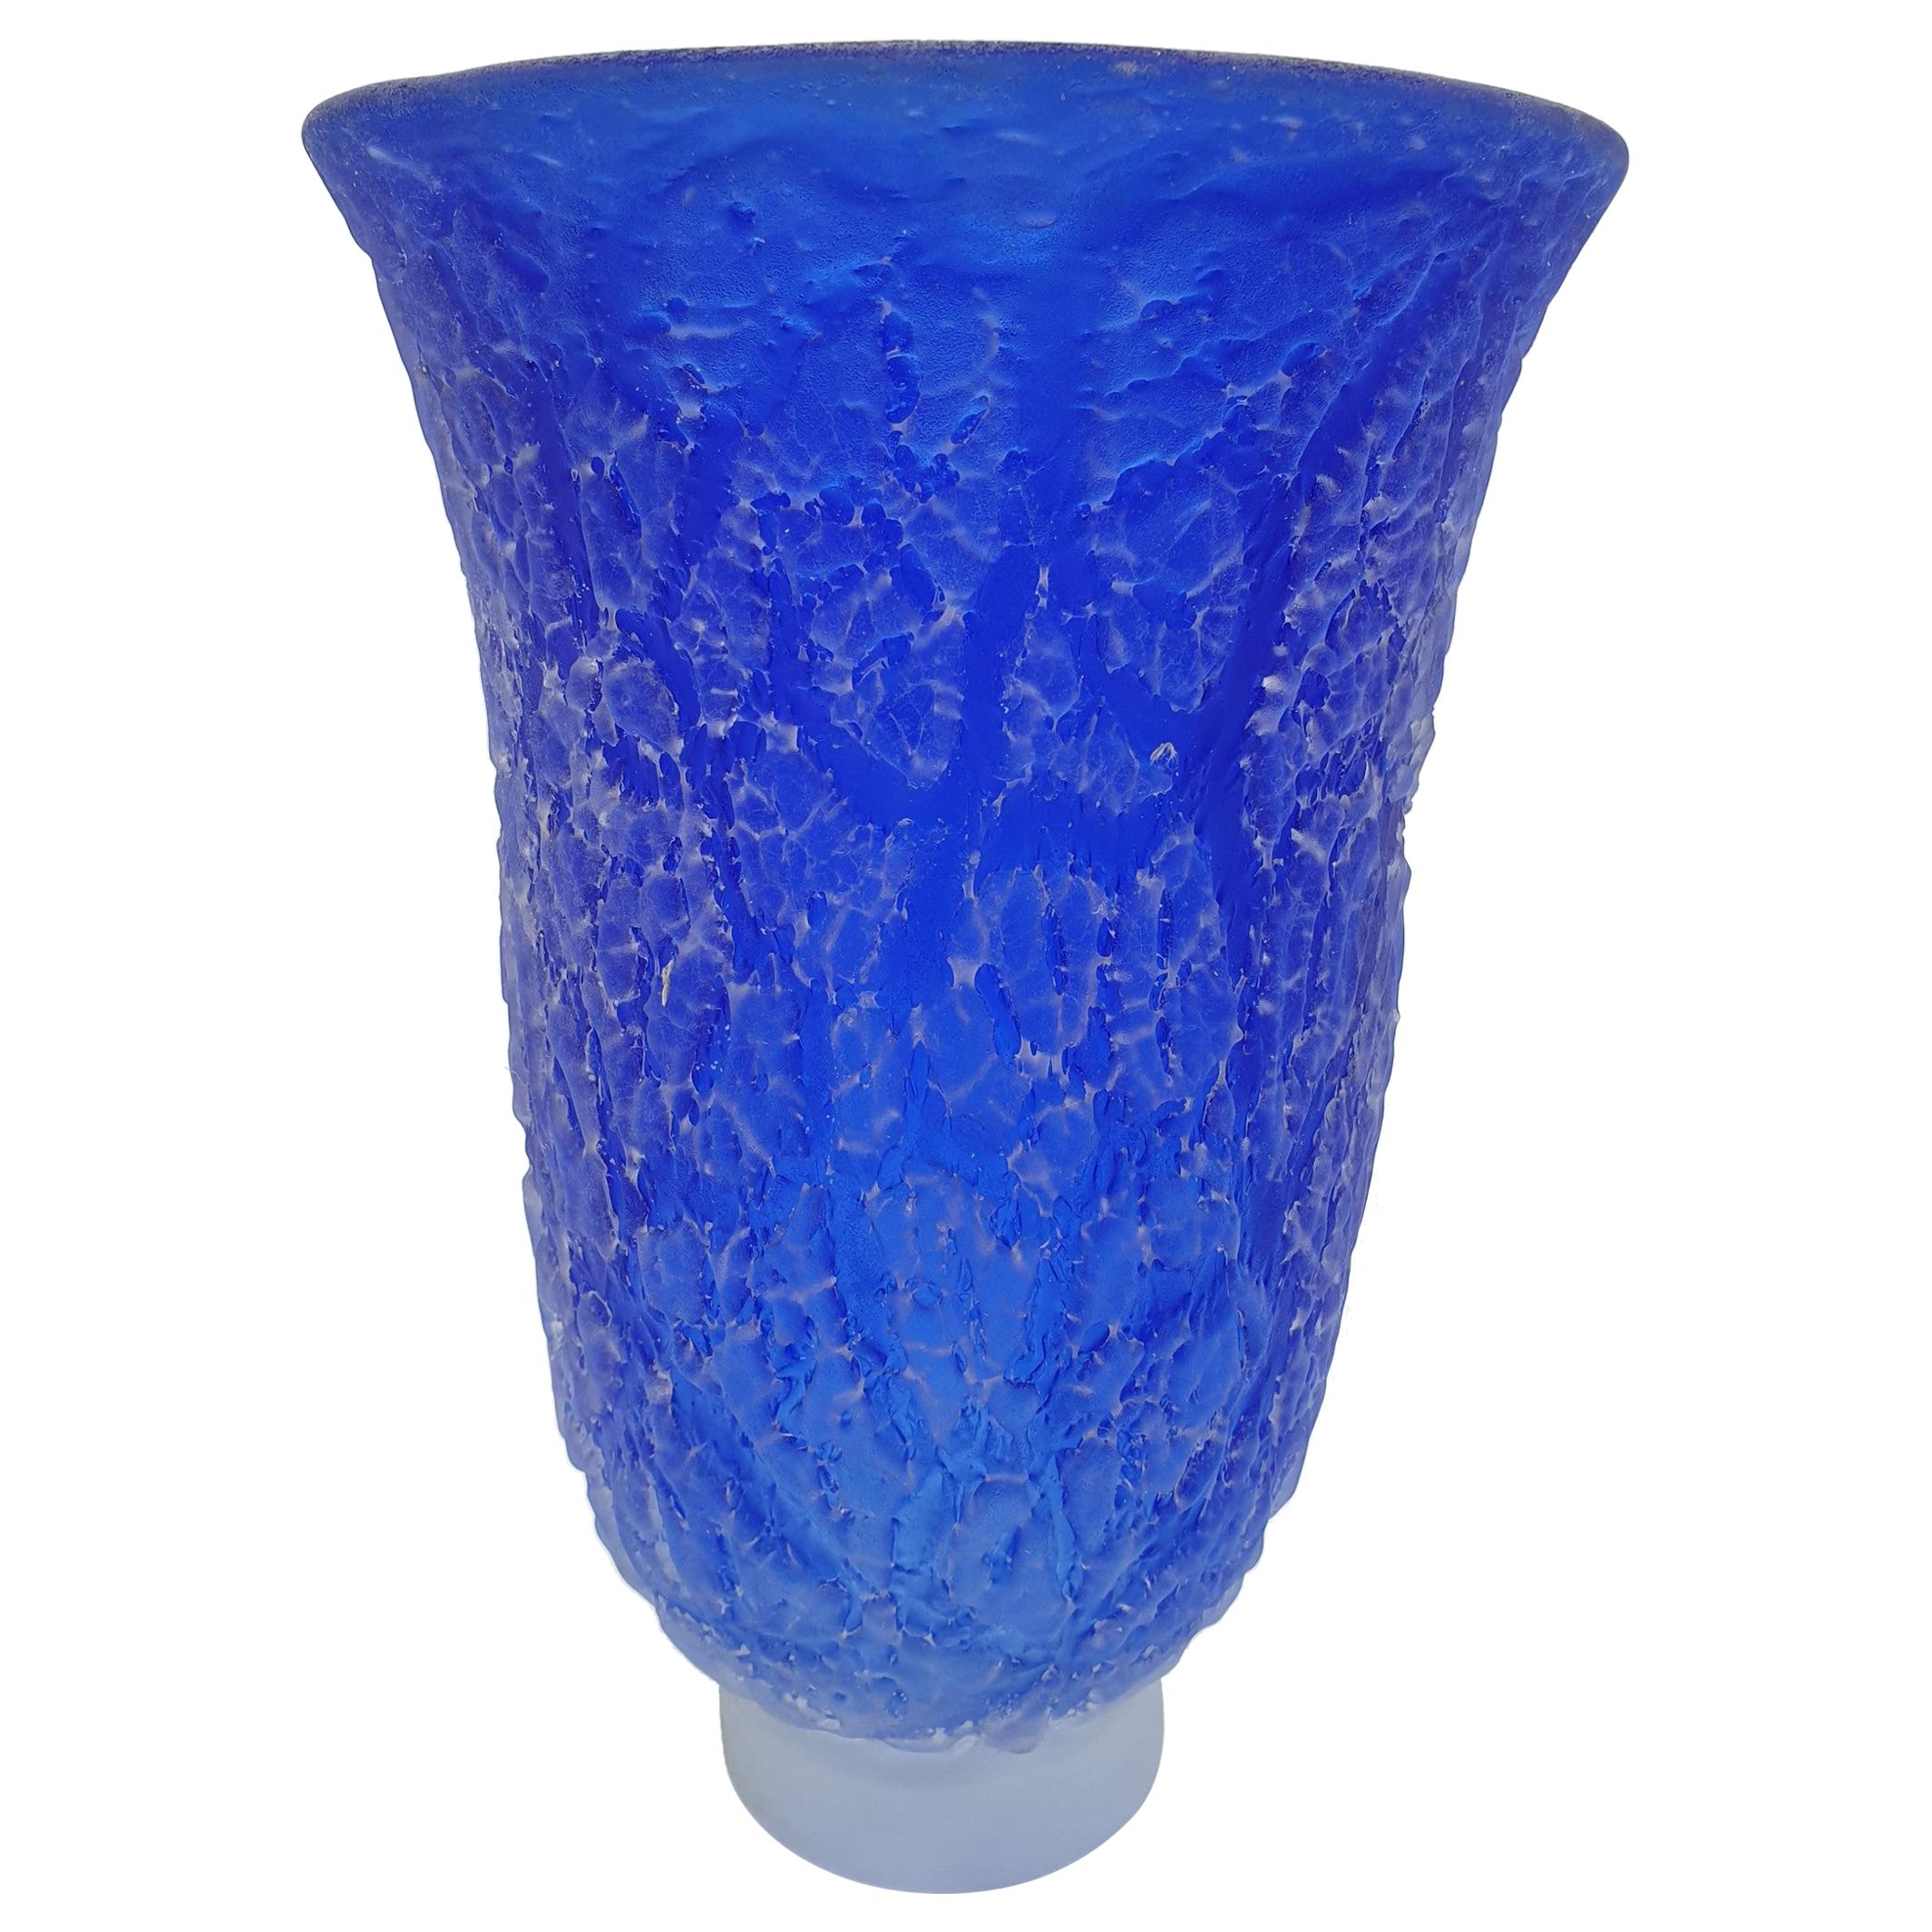 Modern Blue Murano "Corroso" Crakle Glass Vase, Scavo Finish by Gino Cenedese For Sale